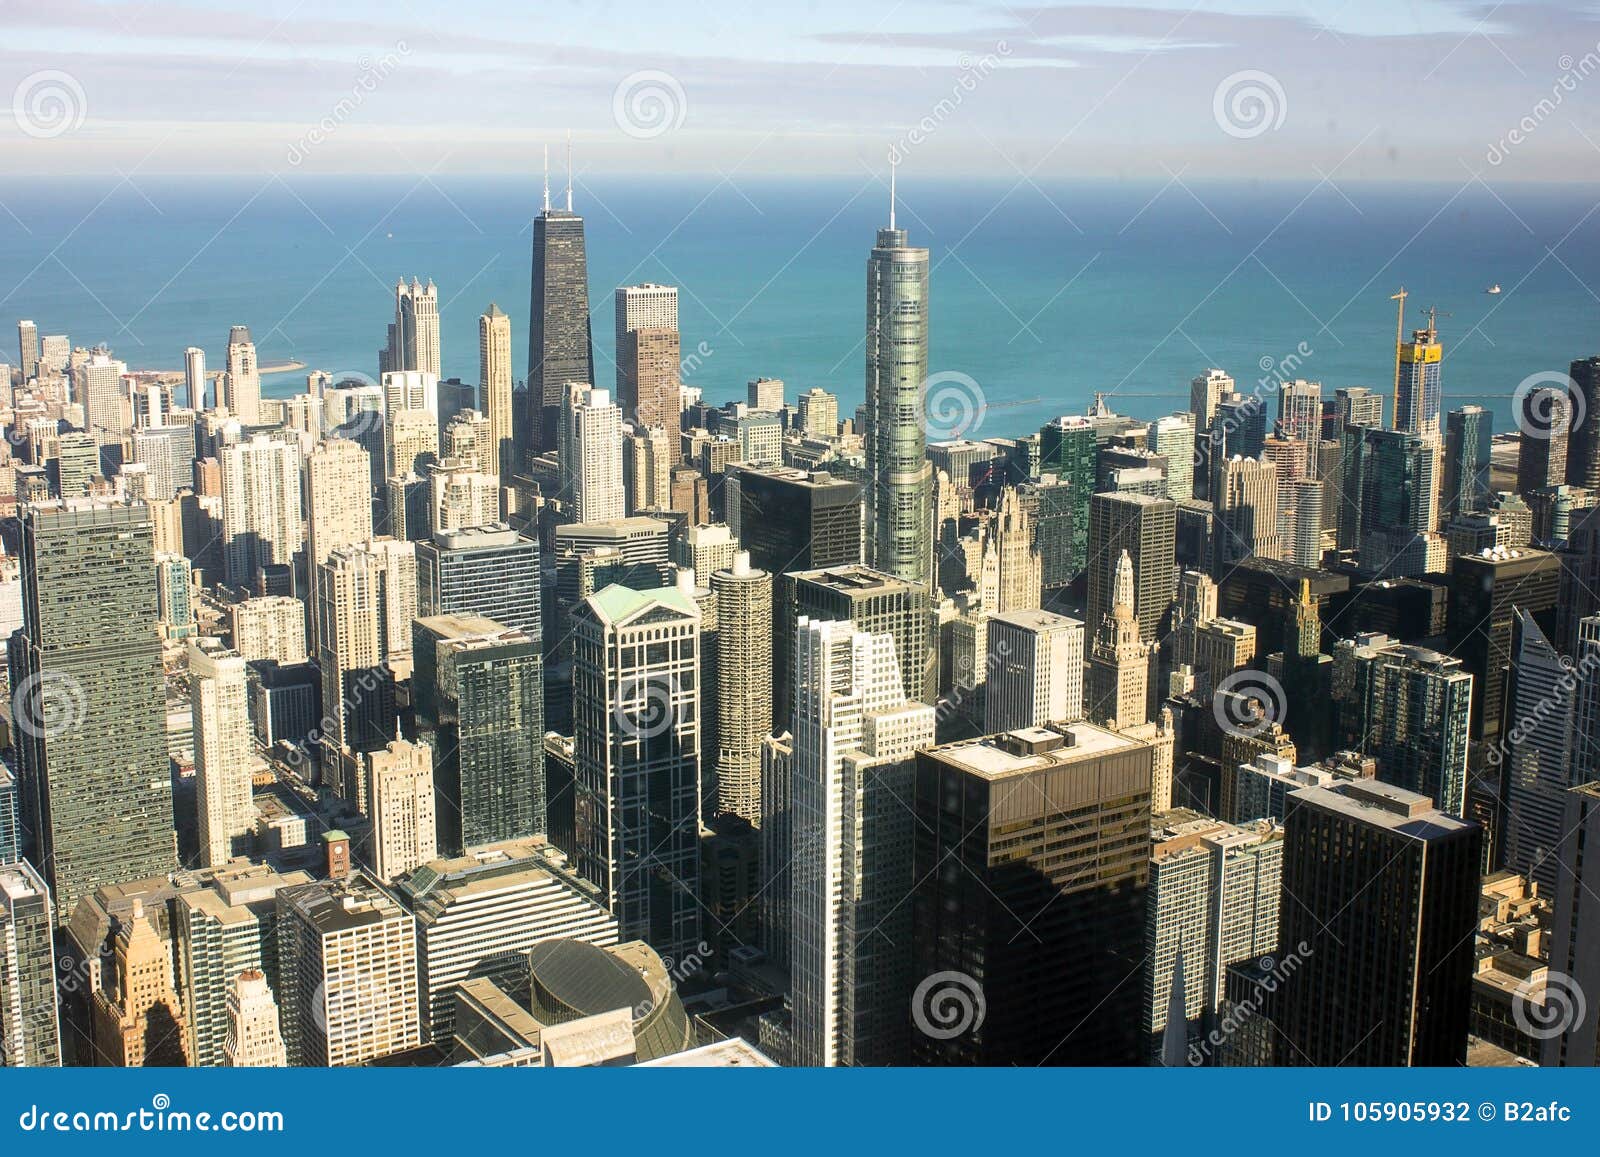 chicago downtown as seen from the willis tower